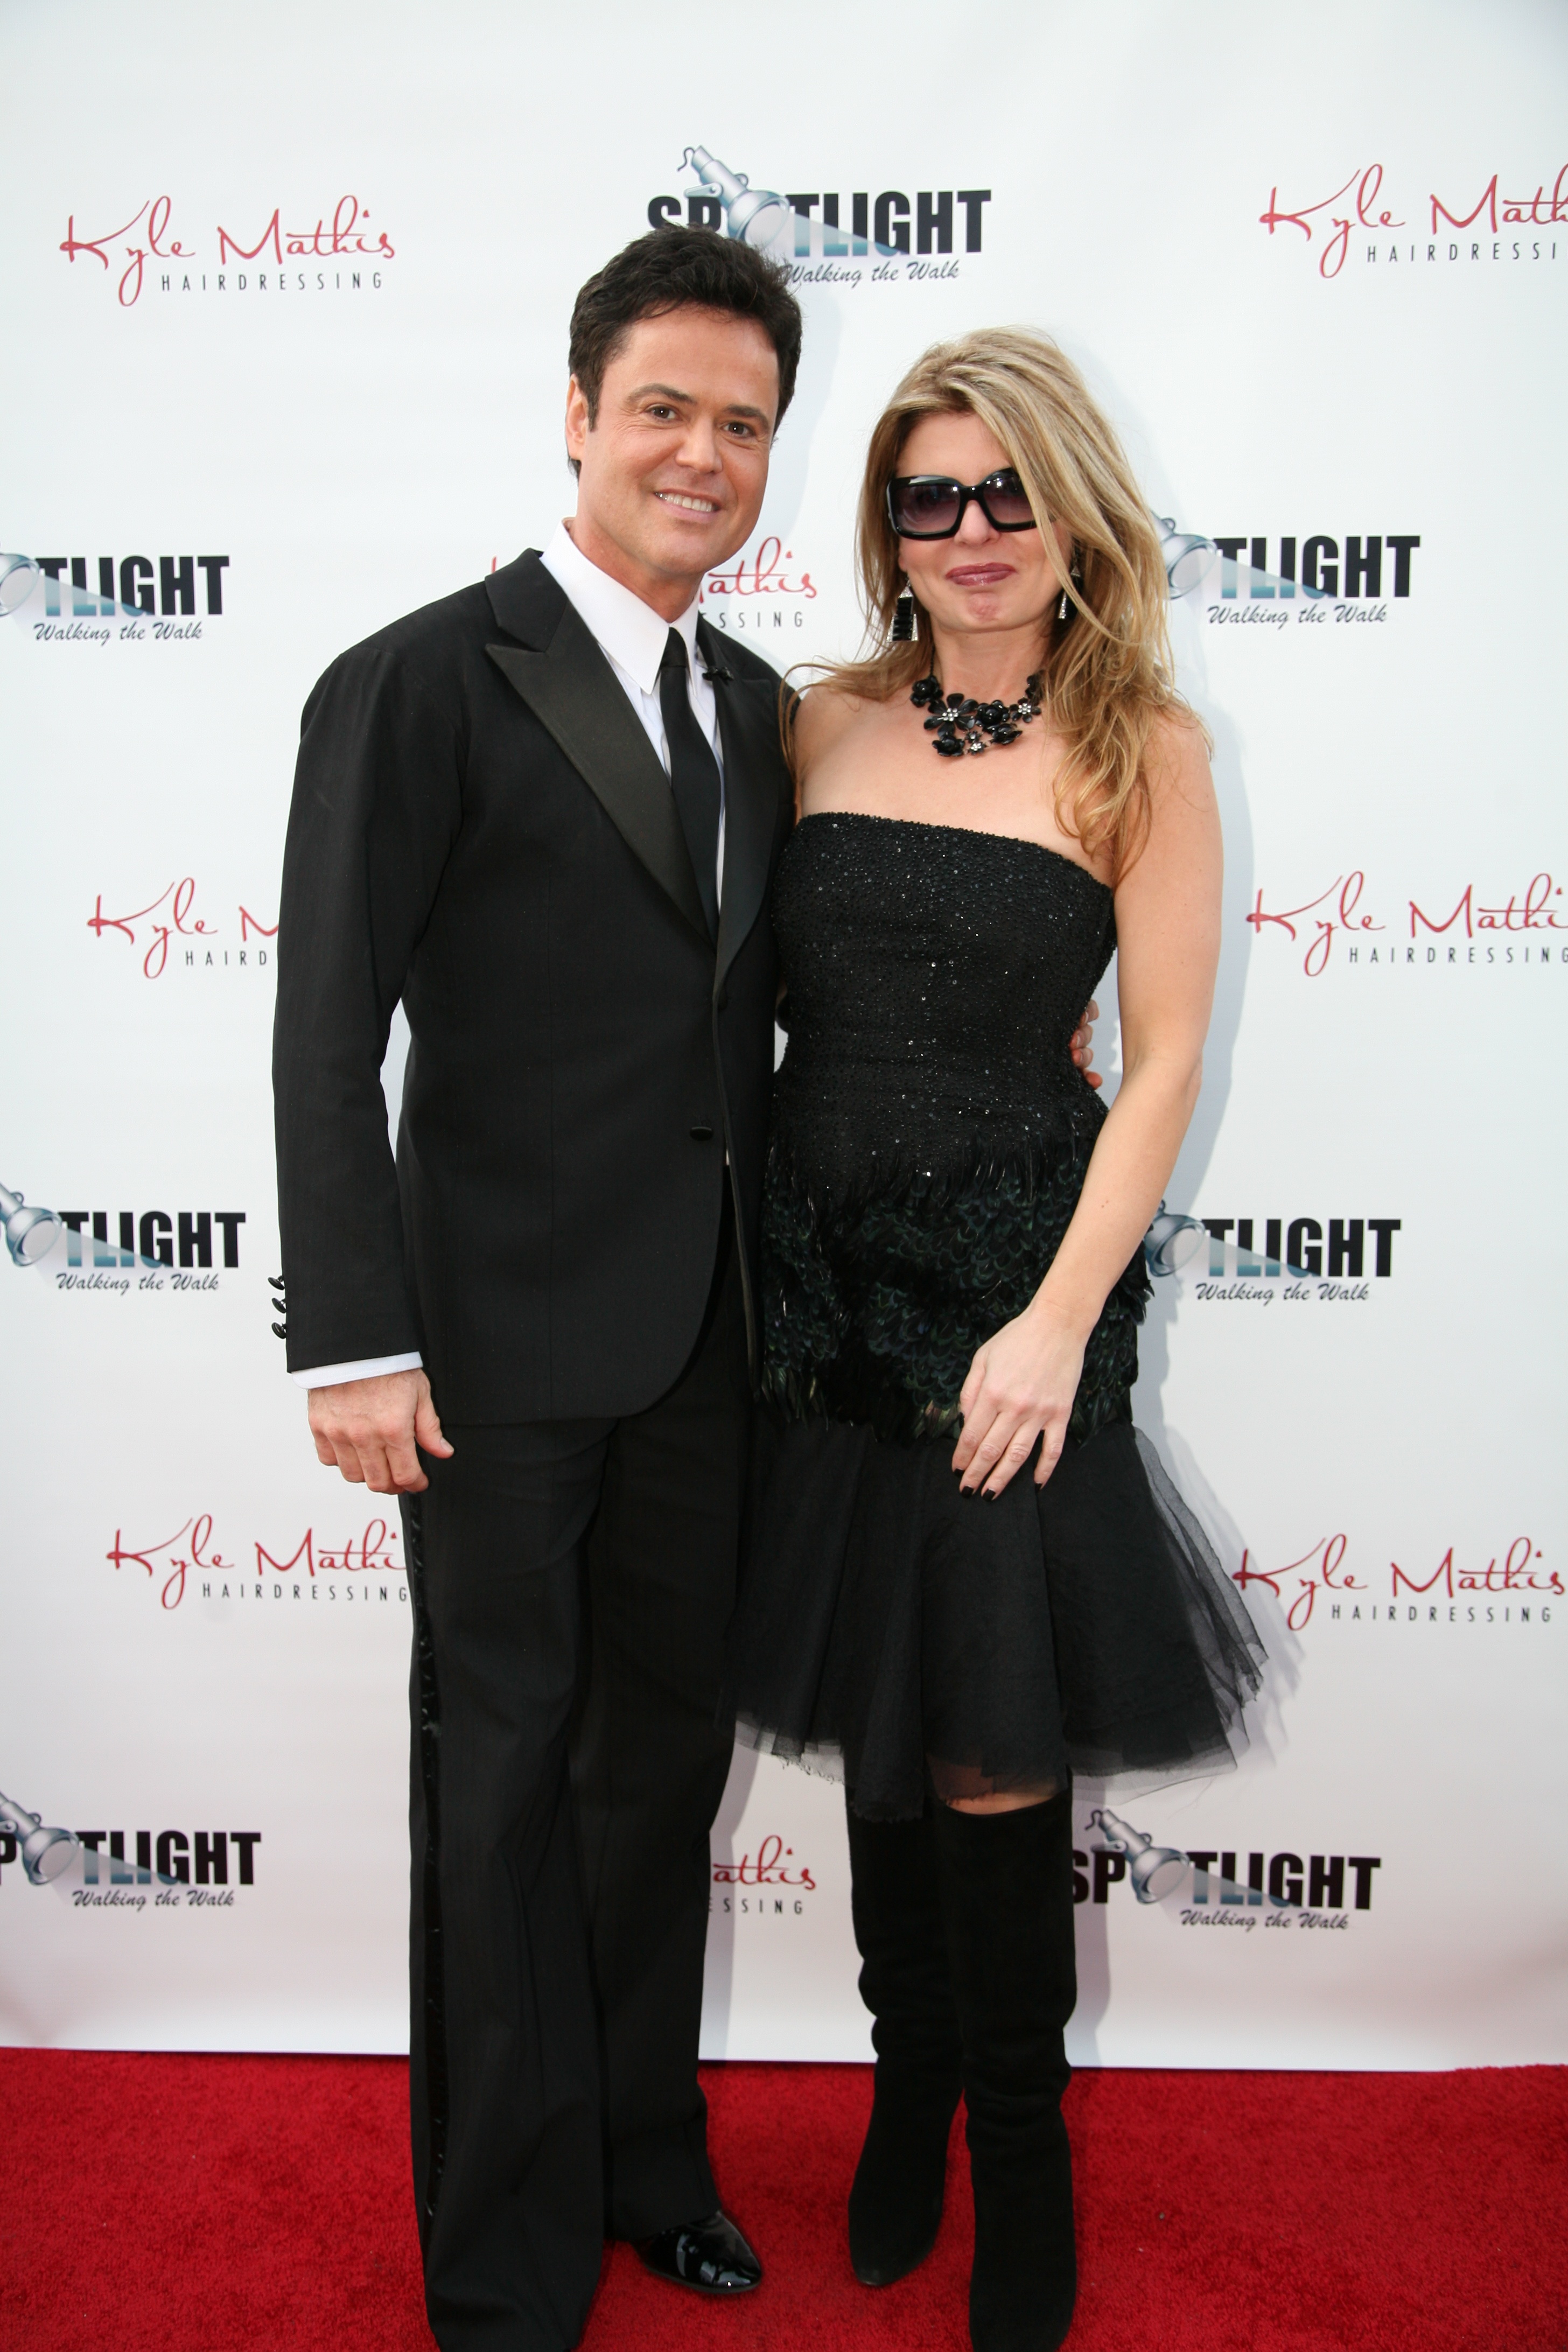 Adrienne Papp and Dancing with the Stars winner, Donny Osmond at the Finale of the show, November 24, 2009